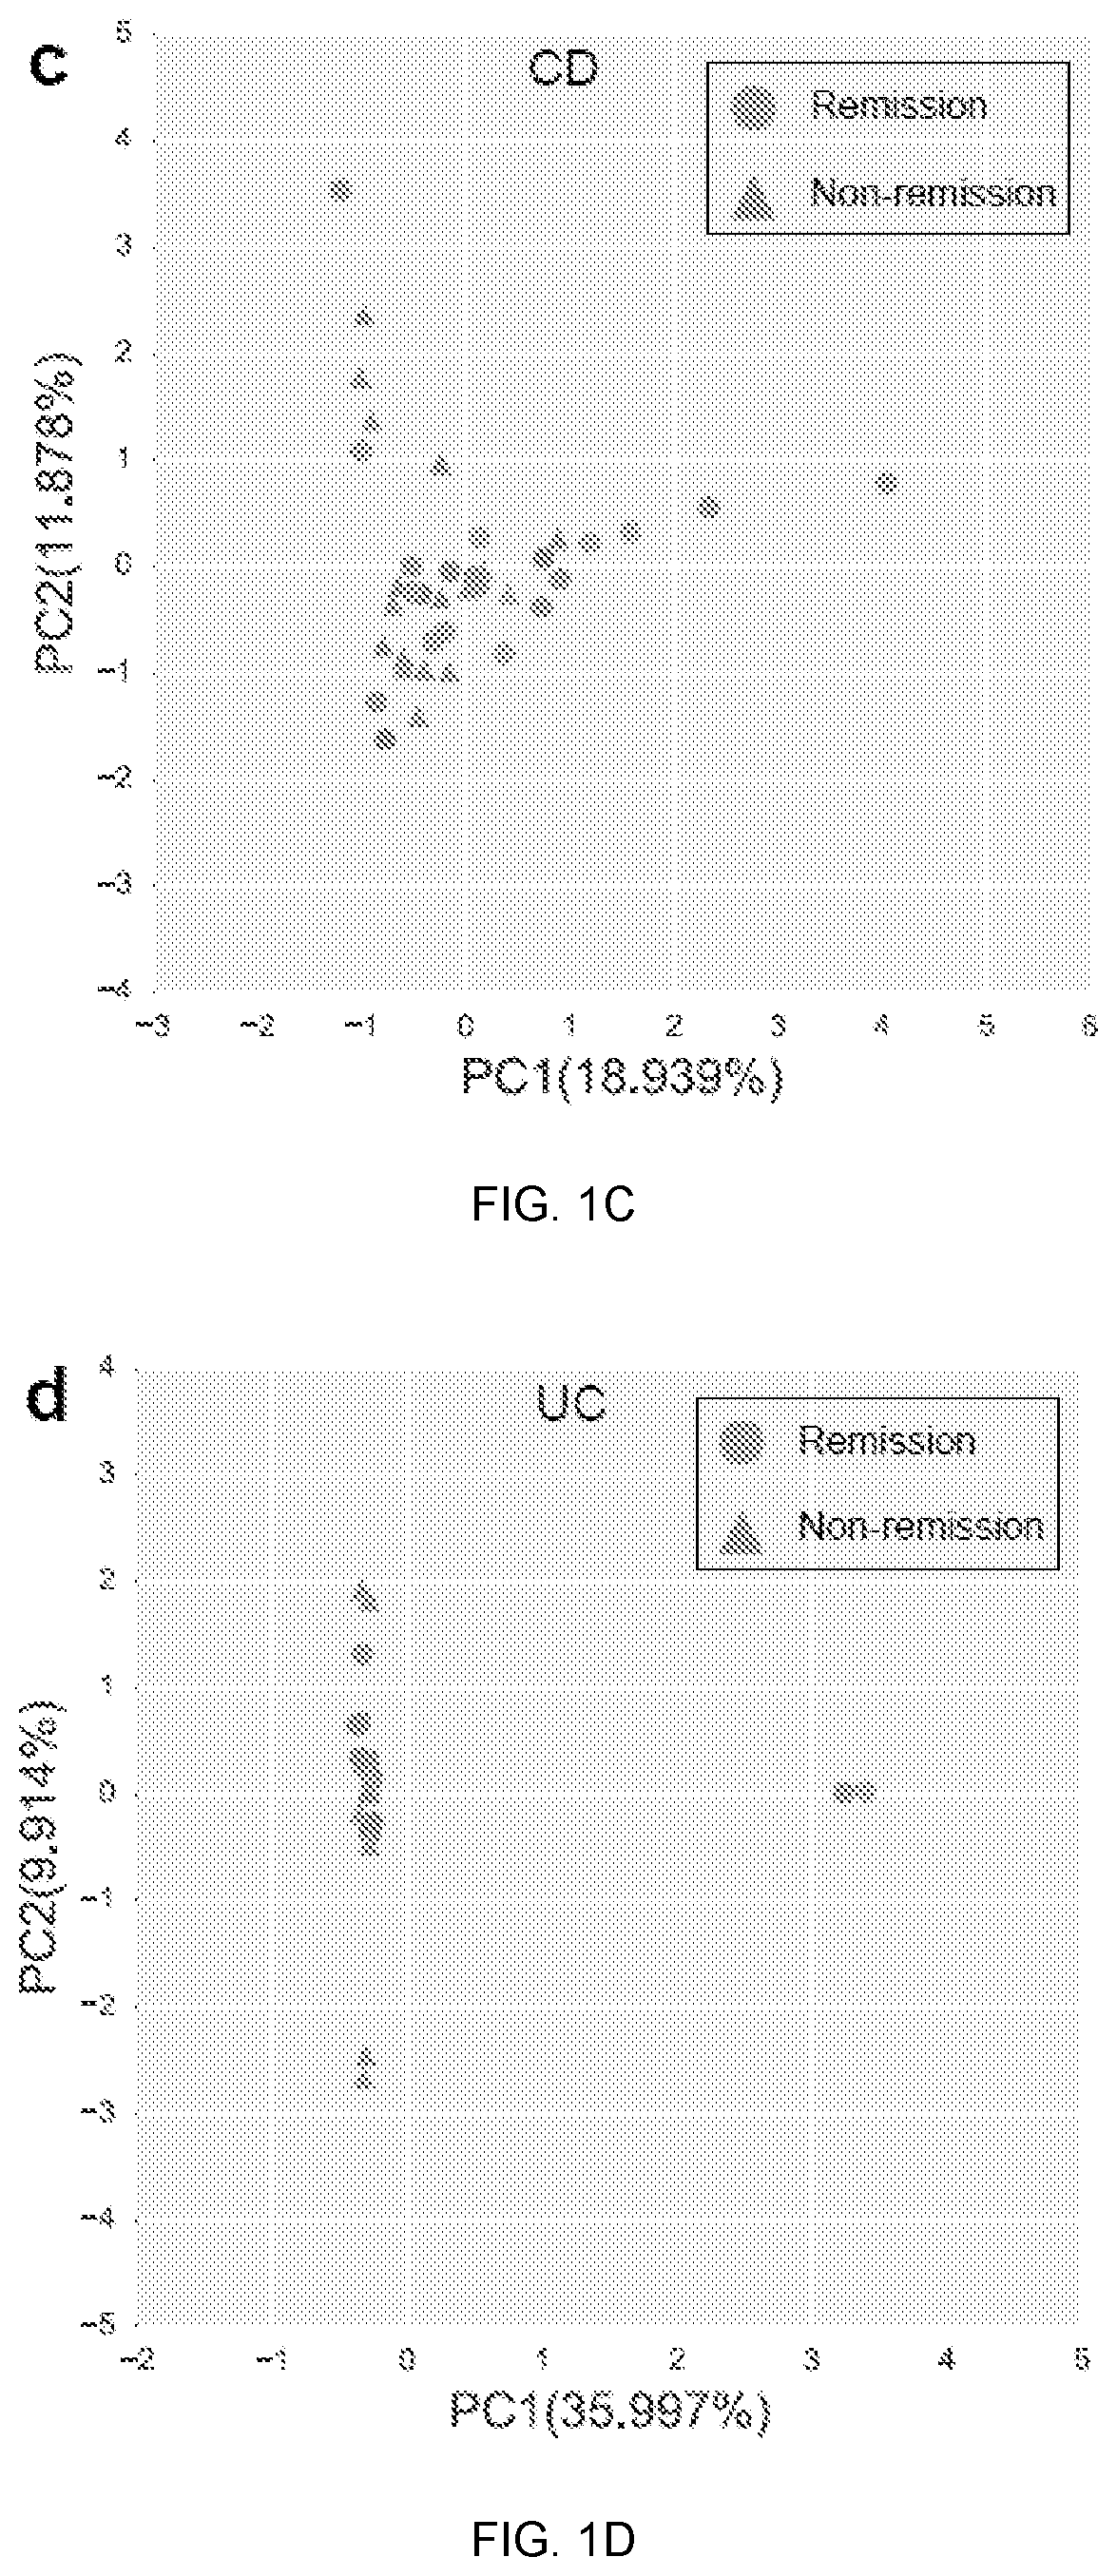 Gut microbiome function predicts response to Anti-integrin biologic therapy in inflammatory bowel diseases